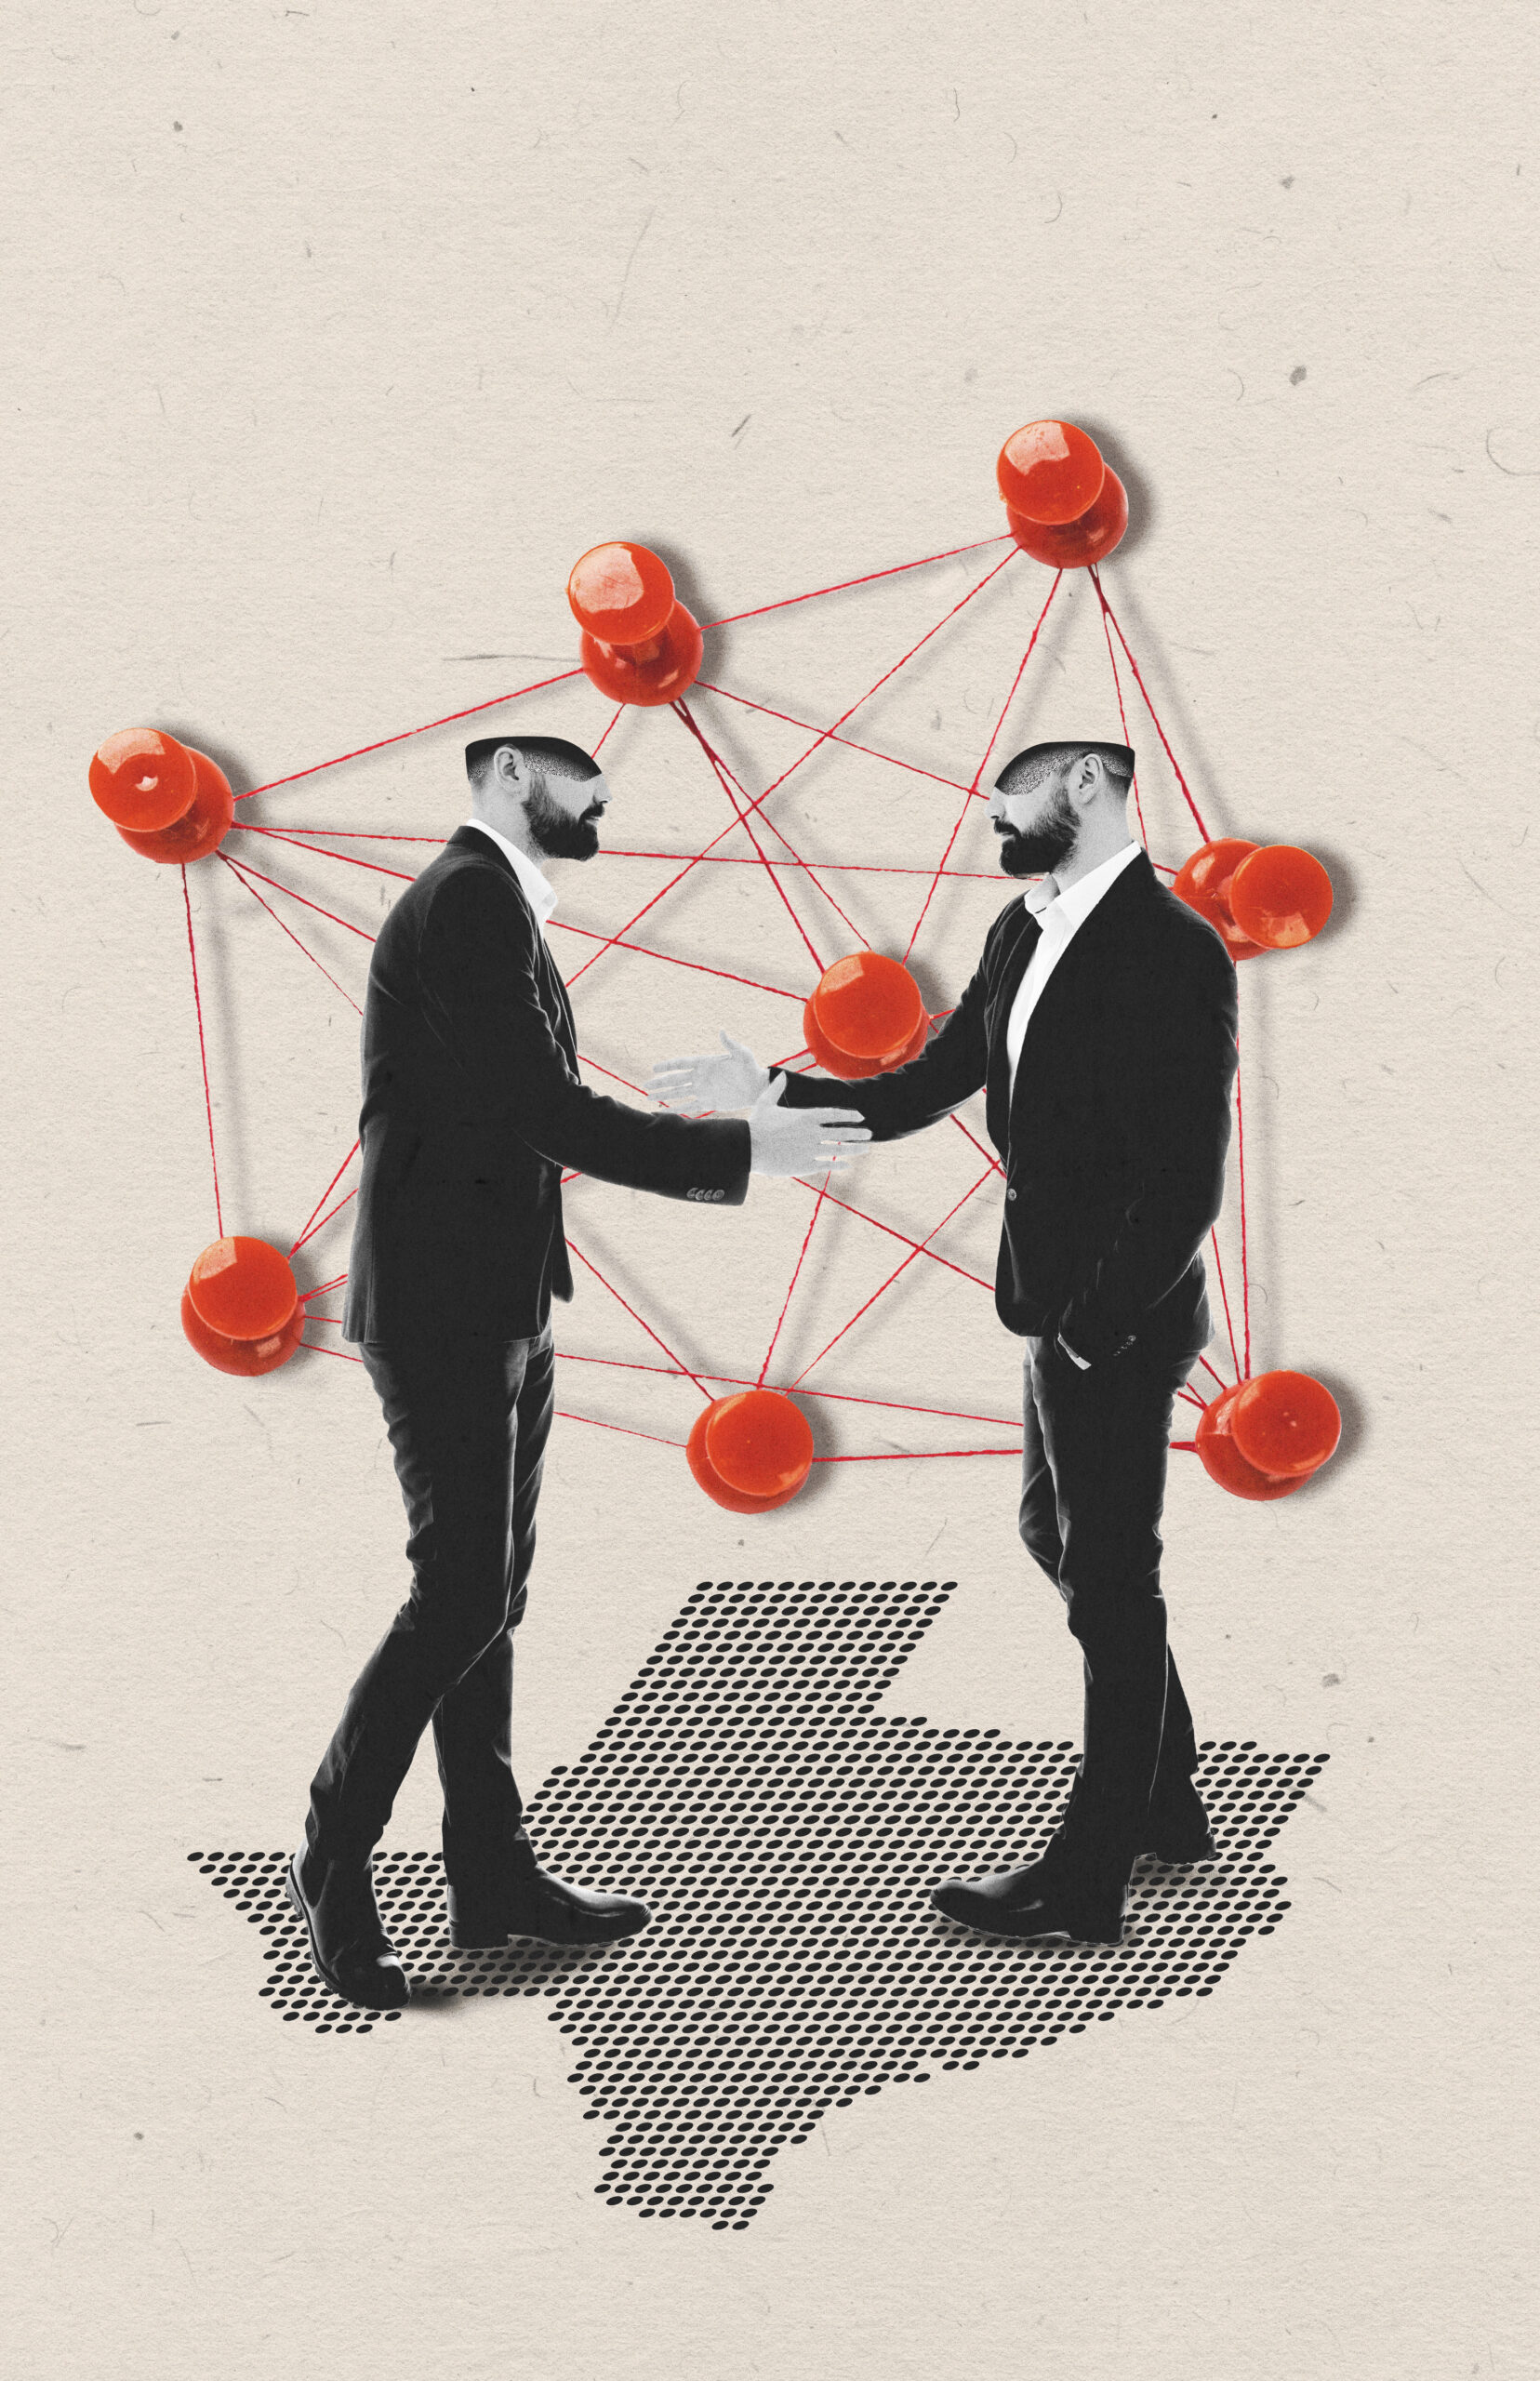 An illustration of two suited men shaking hands as they stand on an outline of the state of Texas. A conceptual illustration of a network, showing red pushpins interconnected by red lines, floats behind them.